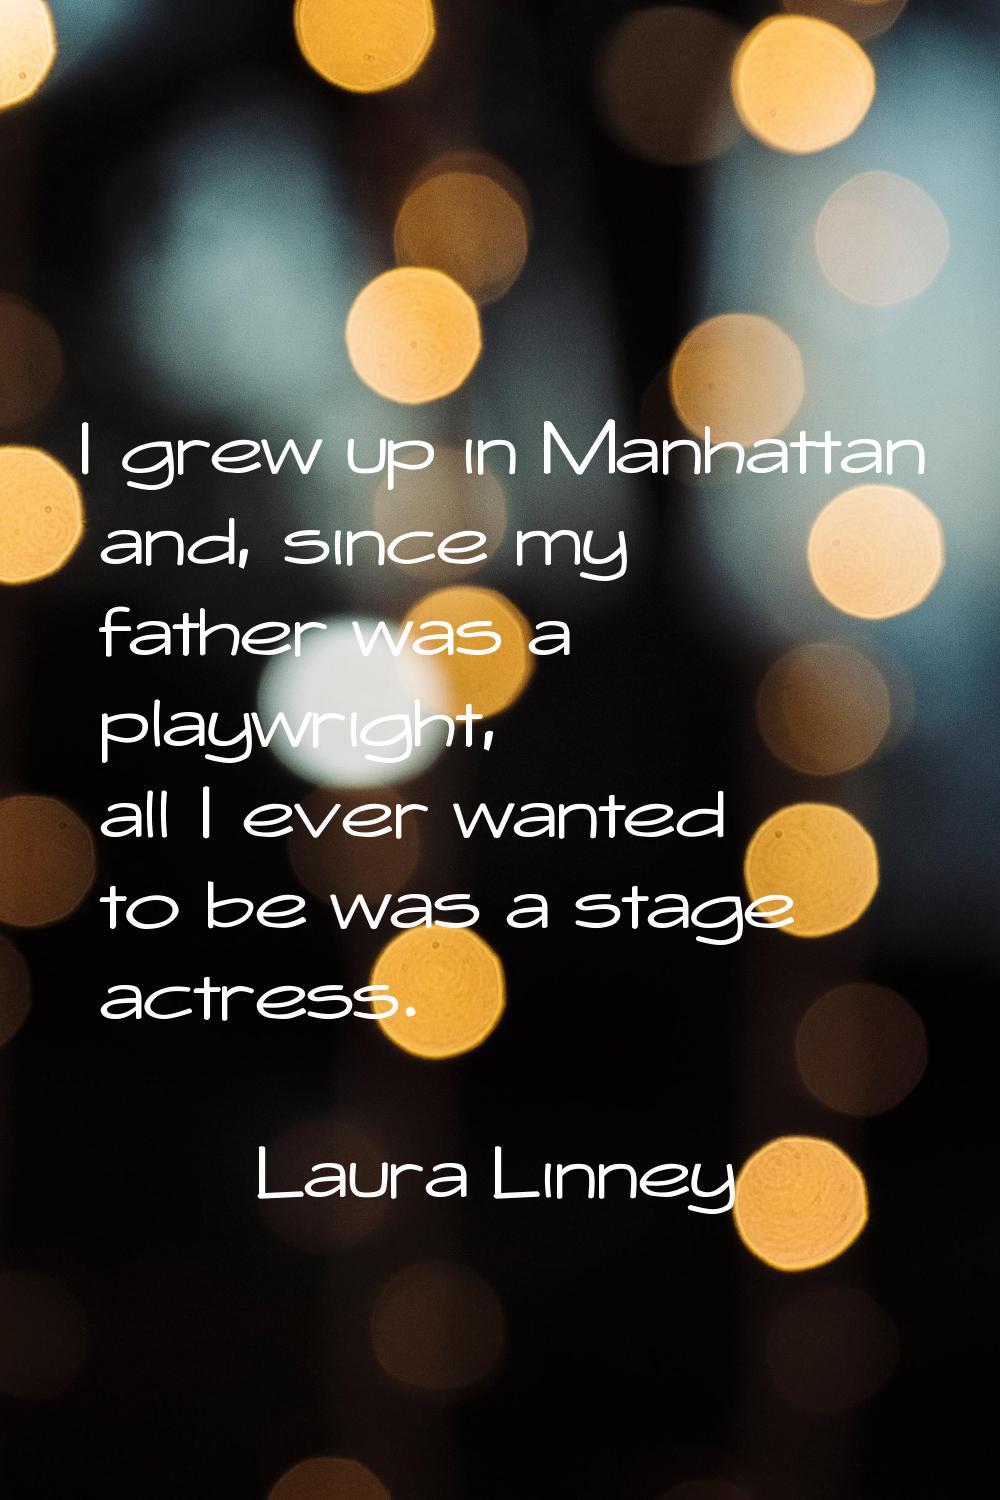 I grew up in Manhattan and, since my father was a playwright, all I ever wanted to be was a stage a